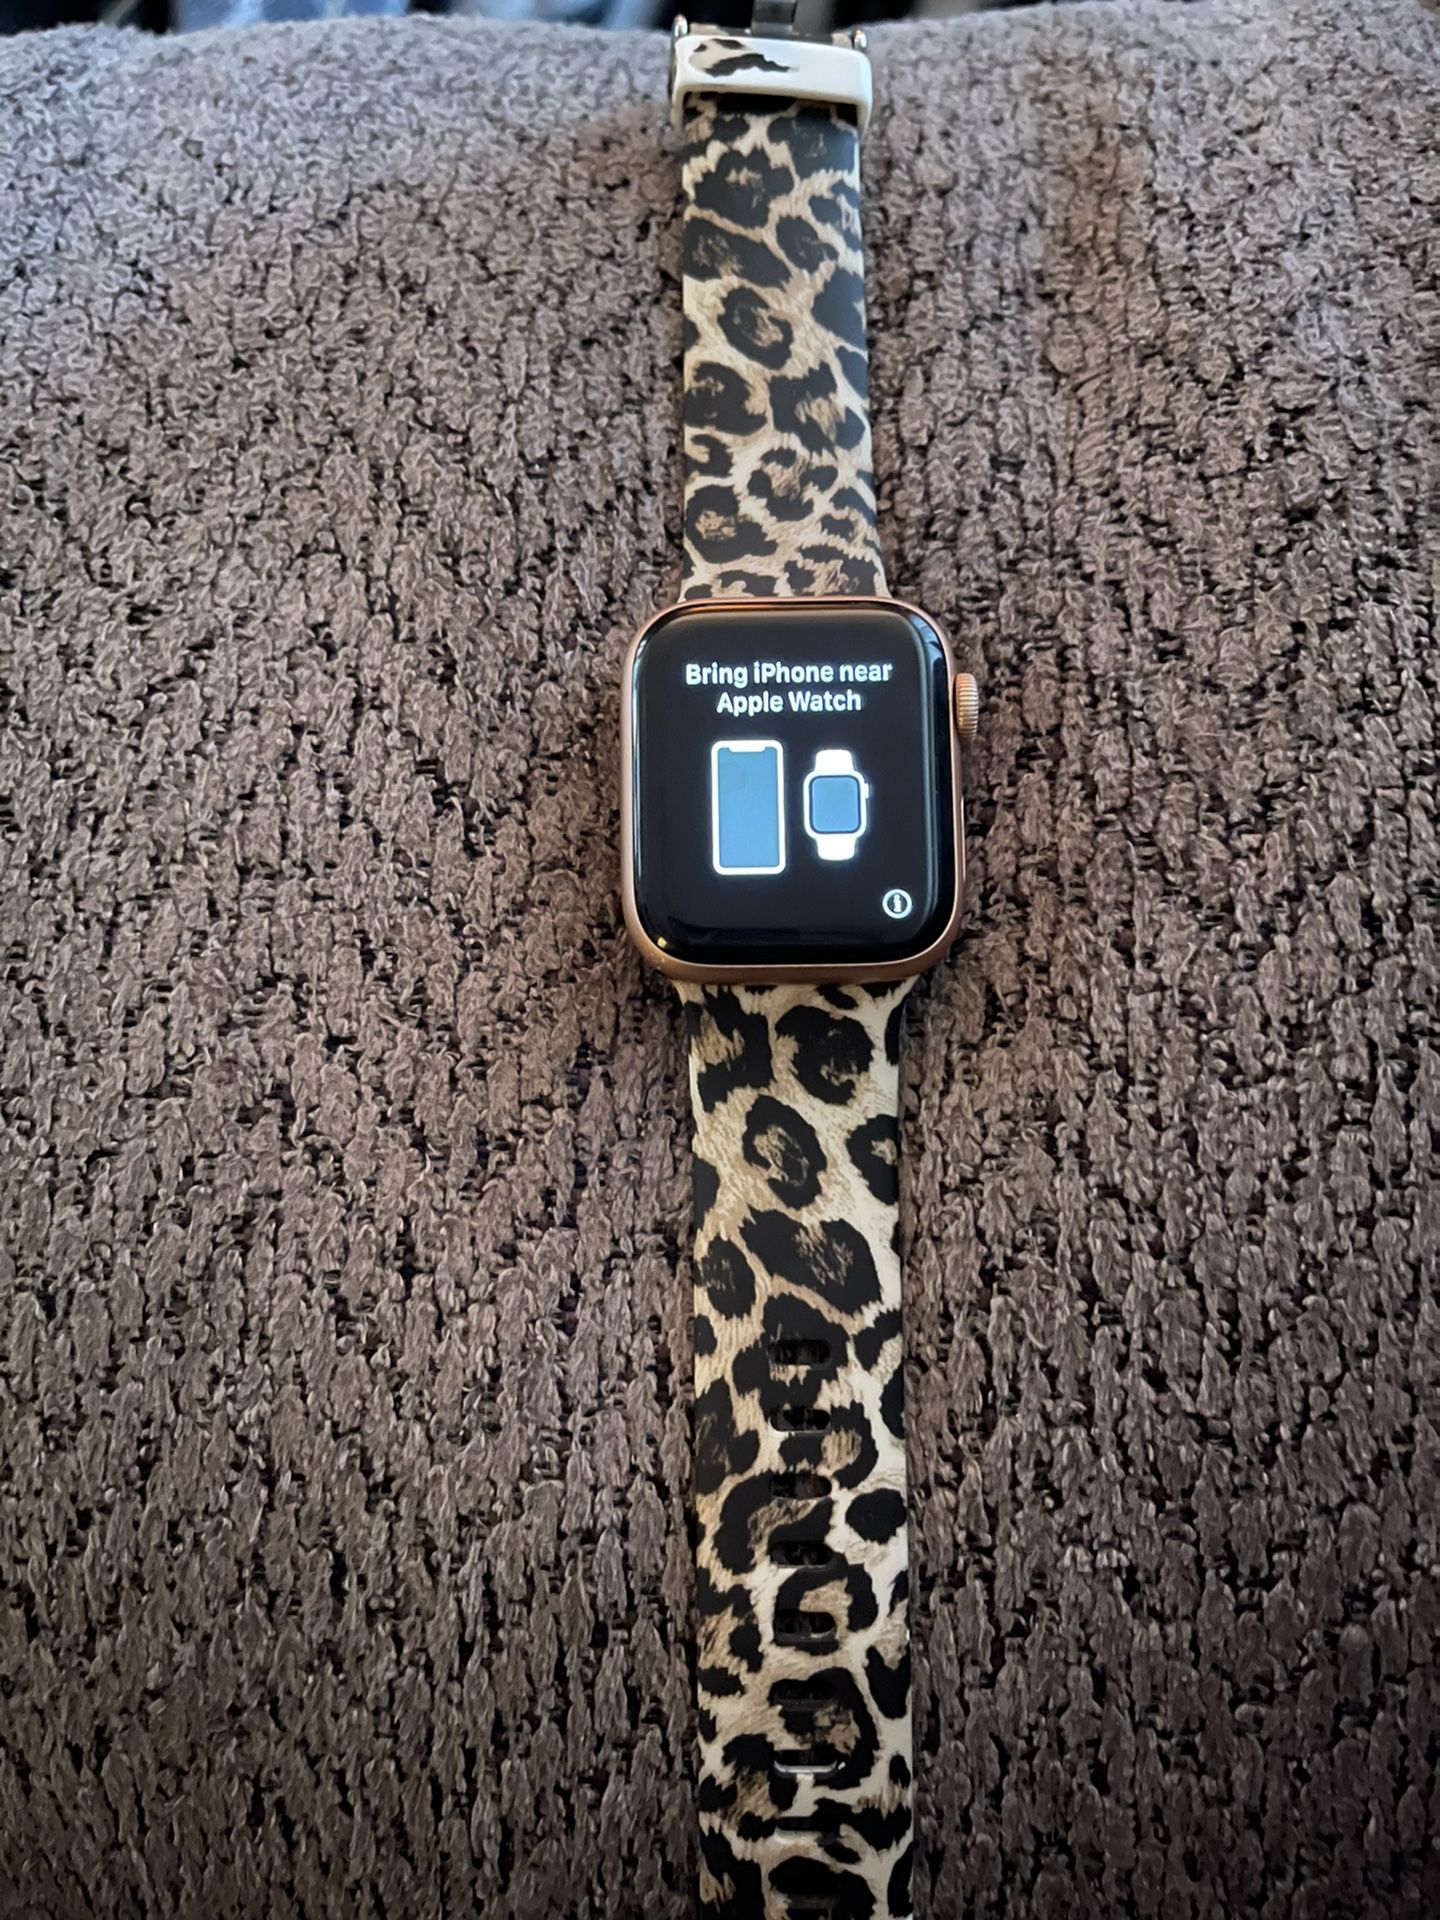 Apple Watch series 5 with GPS